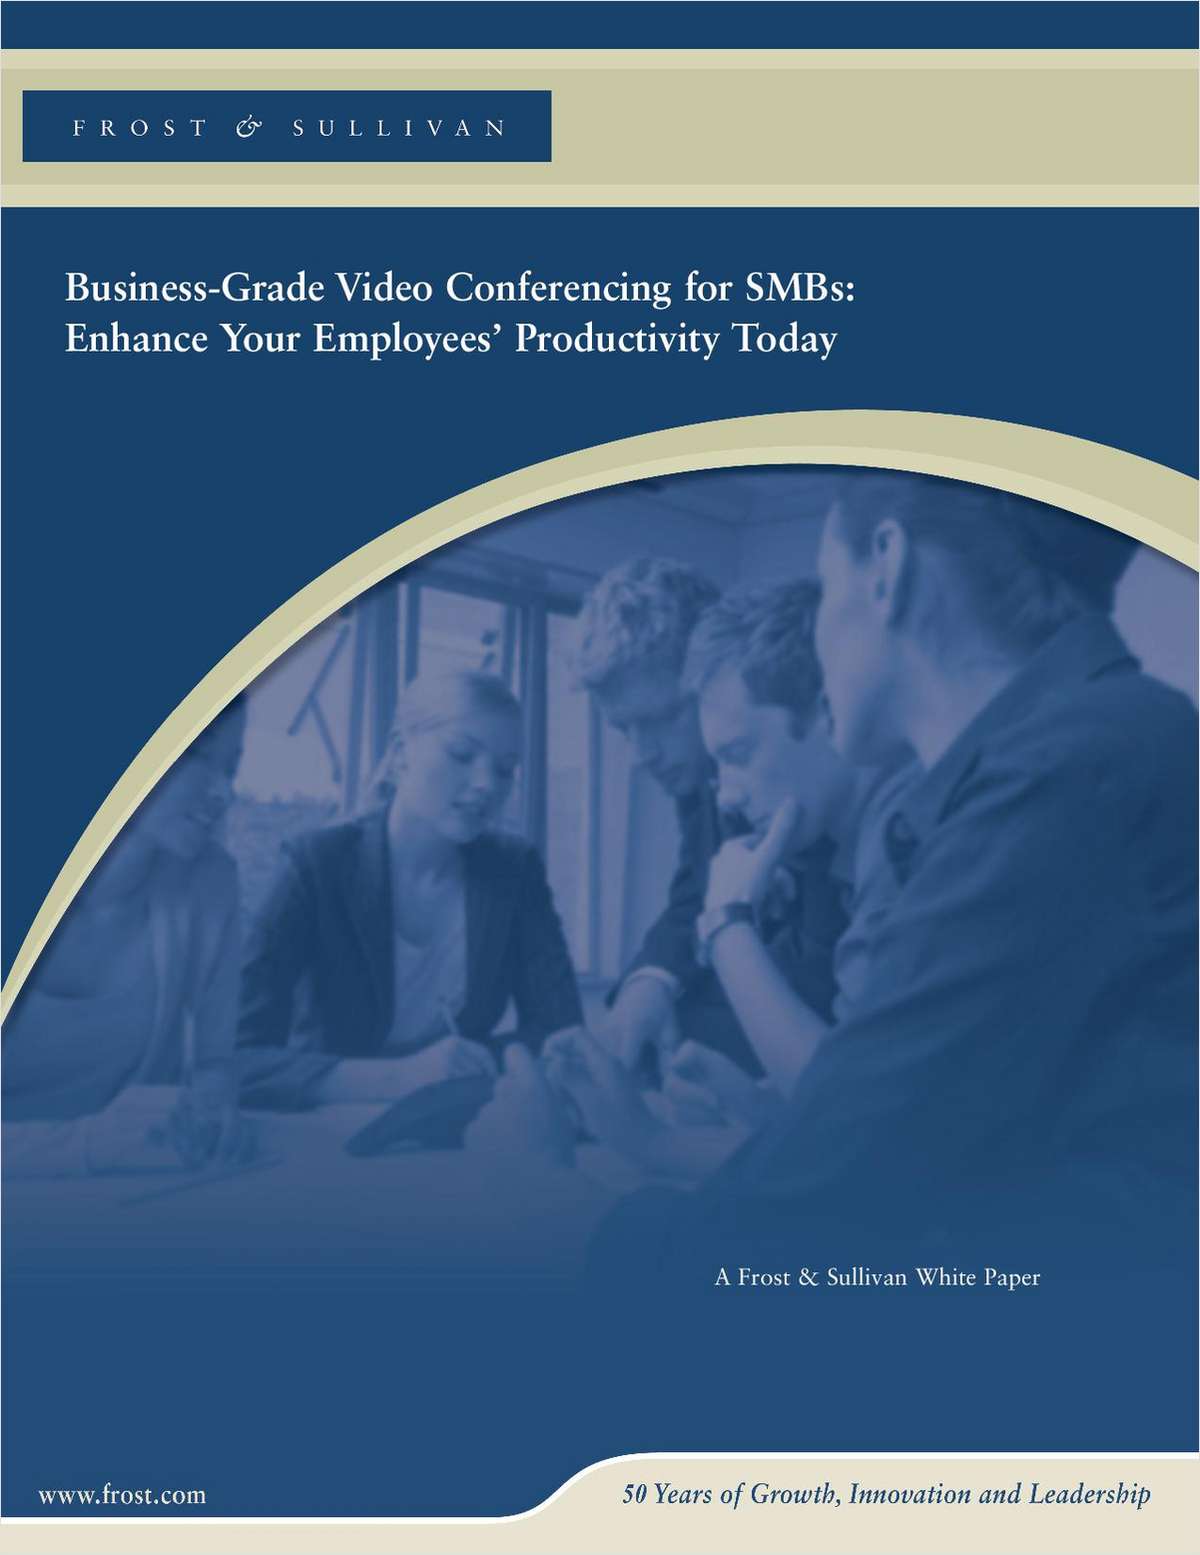 Business-Grade Video Conferencing for SMBs: Enhance Your Employees' Productivity Today